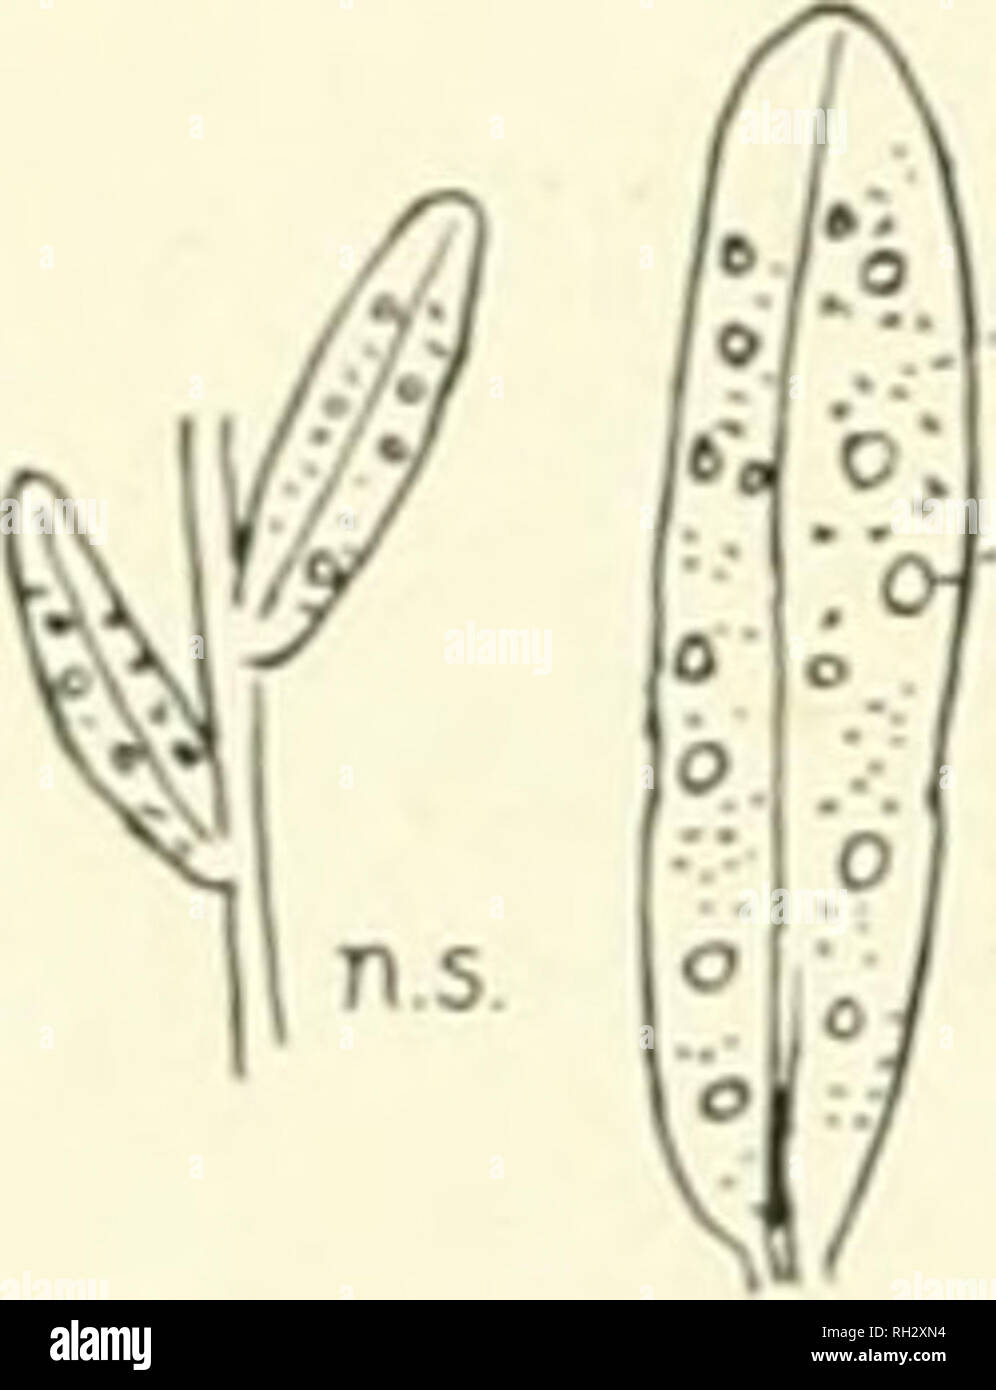 . The British rust fungi (Uredinales) their biology and classification. Rust fungi -- Great Britain. 00 UROMY&lt; ES. U. Pm Winter, Krypt Flor. i. L63. Cooke, Grevillea, vii. L35. Plowr. [Jred. p. 133. Sacc. S]]. vii. 542 p.p. Sydow, Monogr. ii. L24. Fischer, [Jred. Schweiz, p. 28, f. 22. Spermogones. Hypophyllous, numerous, scattered amongsl the a-cidia. /Ecidiospores. ^Ecidia distributed uniformly over the lower surface of the leaf, cup-shaped, with ;i while, torn, broadly revolute margin; spores densely and minutely verruculose, orange, 18—23 /x. irrcf/')sj)nre.s. Sori generally hypophyllo Stock Photo